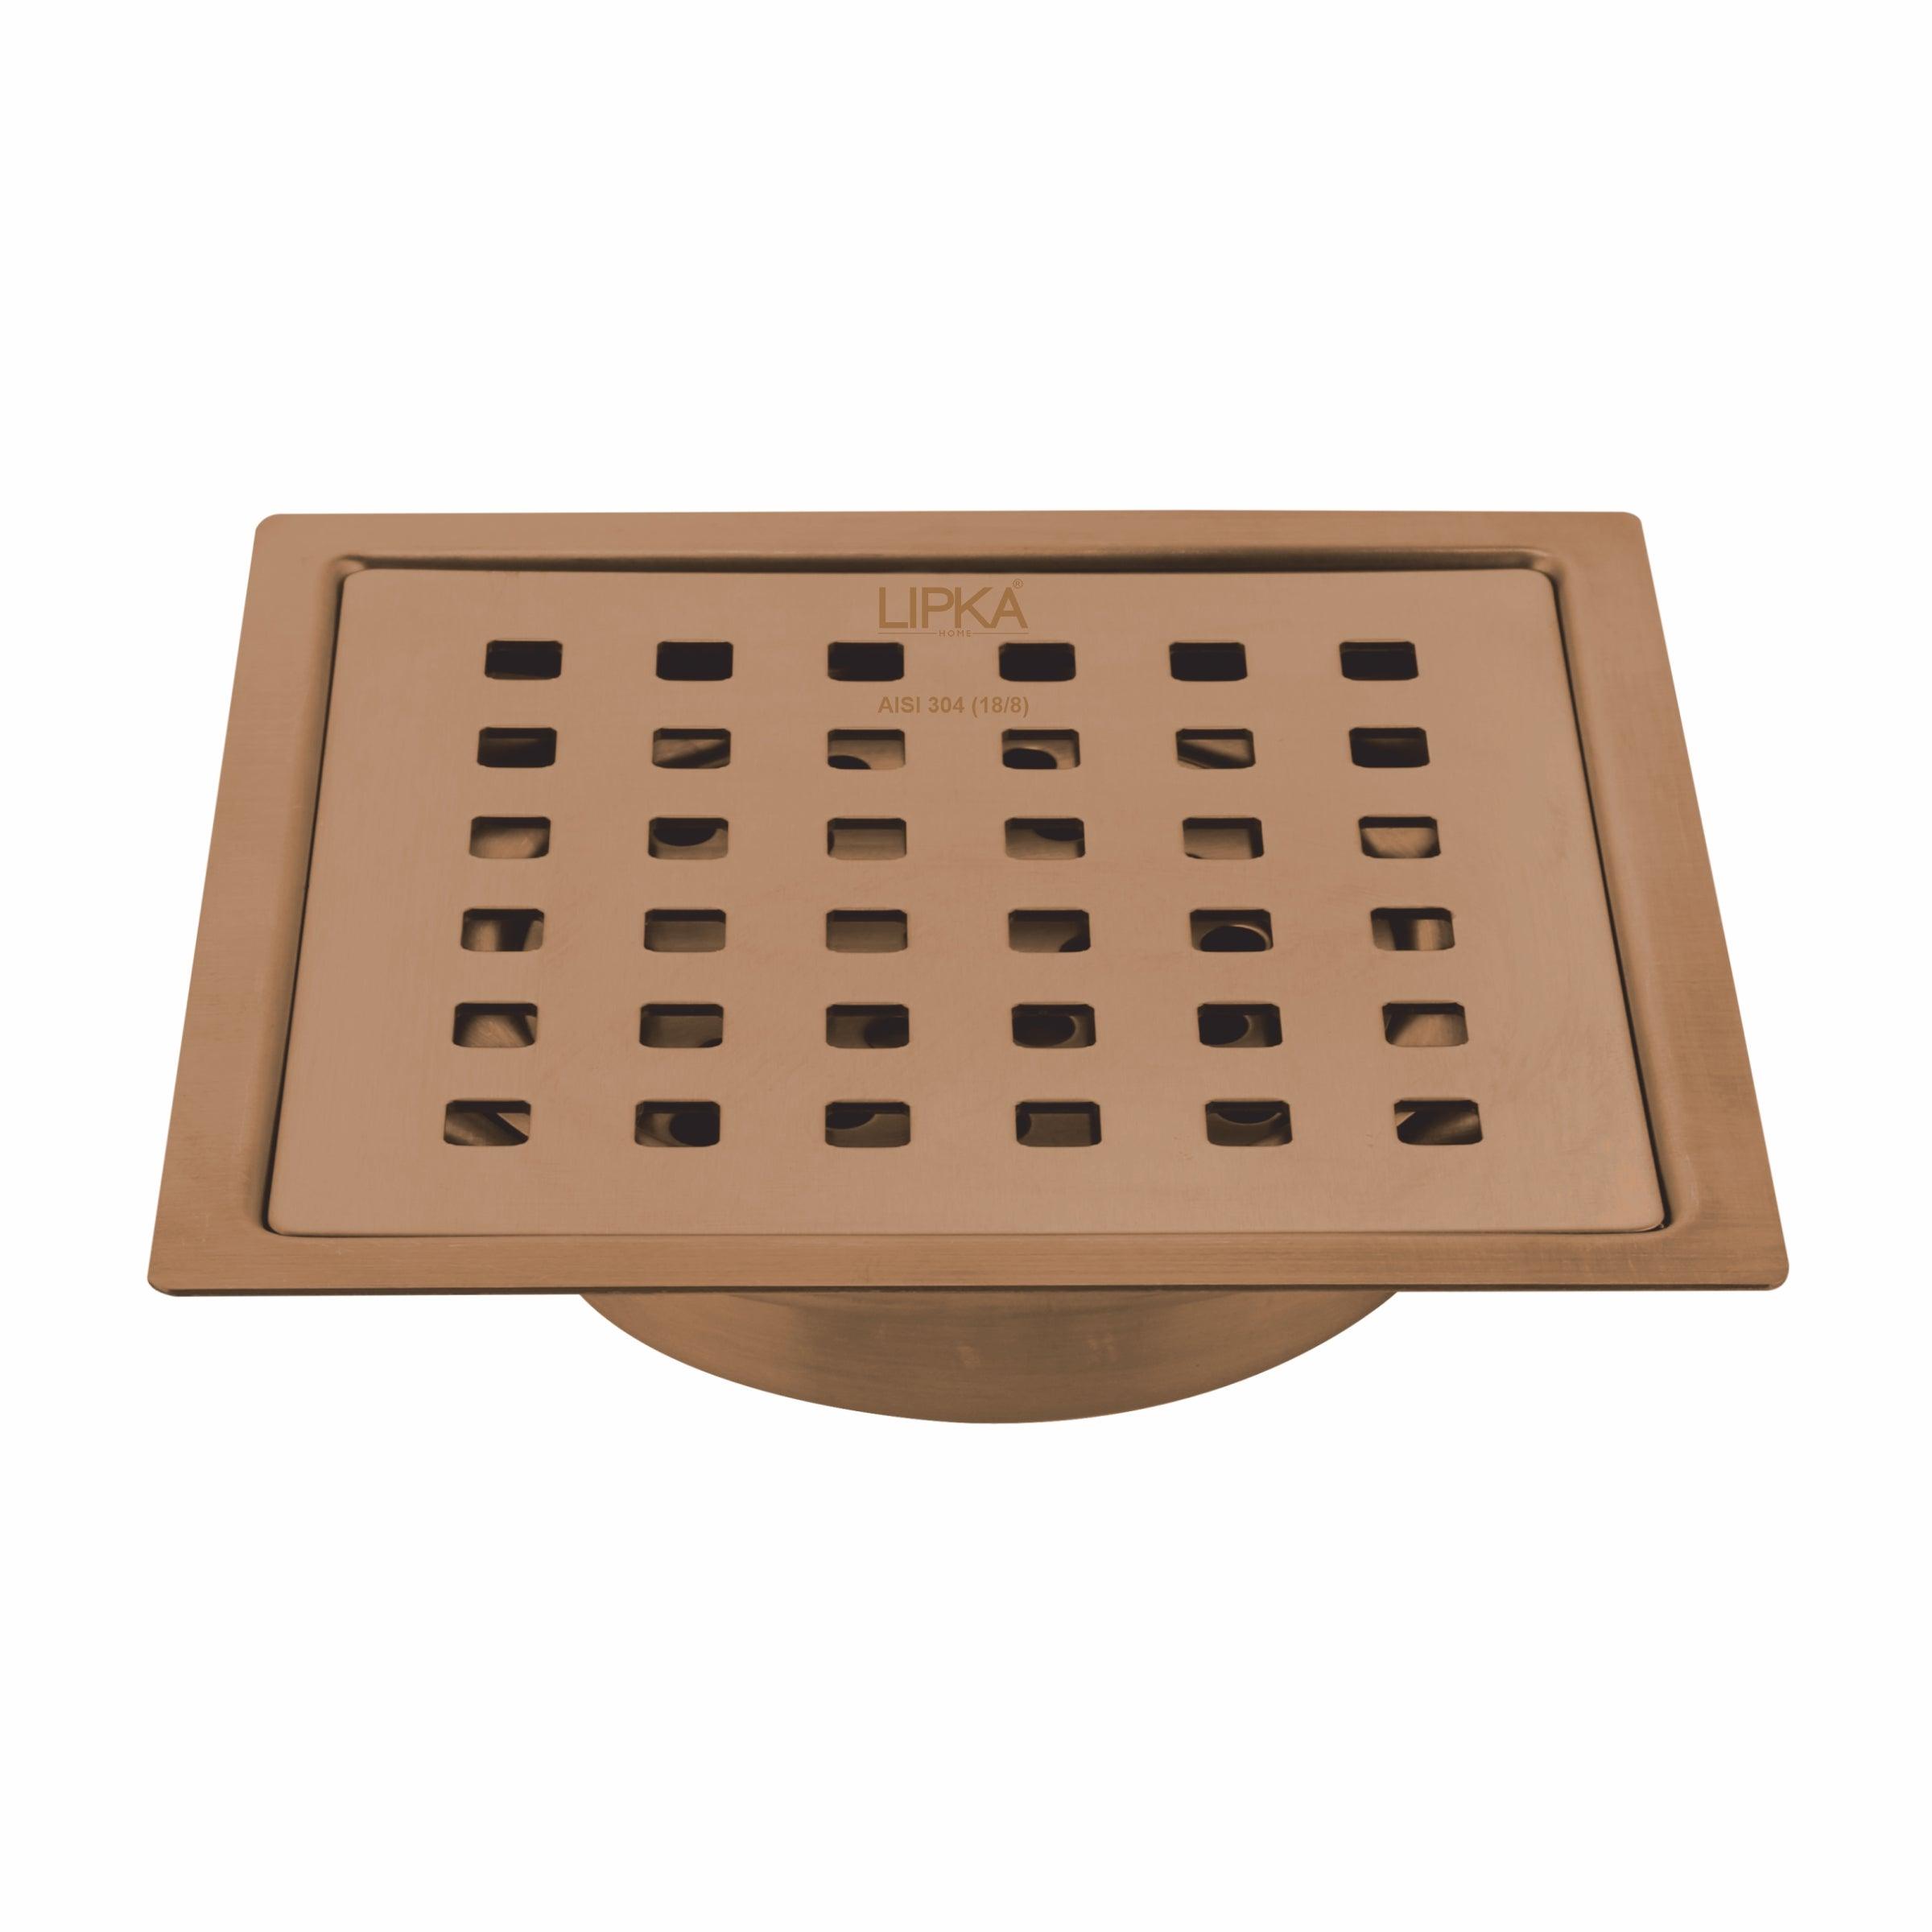 Red Exclusive Square Flat Cut Floor Drain in Antique Copper PVD Coating (6 x 6 Inches) with Cockroach Trap - LIPKA